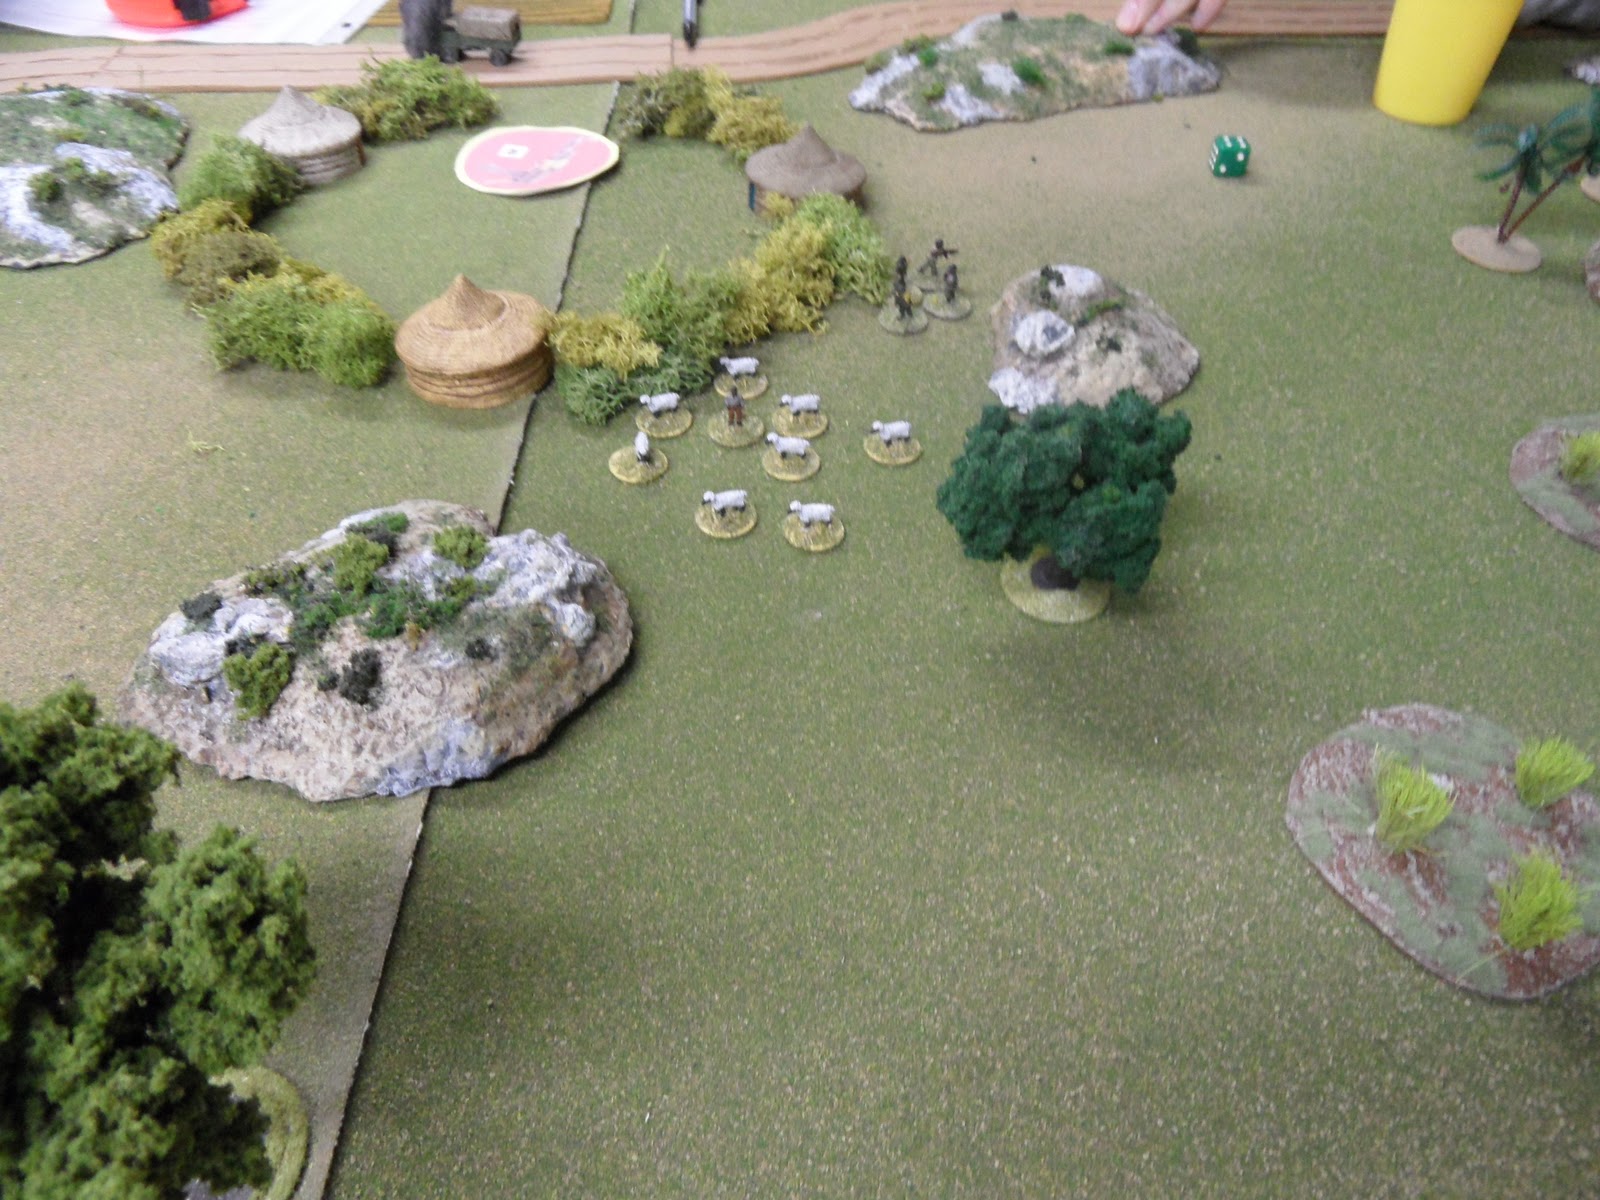 Fearing the retribution of the rapidly advancing R.L.I. the RPG crew fled behind the village  causing the shepherd to try to find a less hazardous area to graze his flock